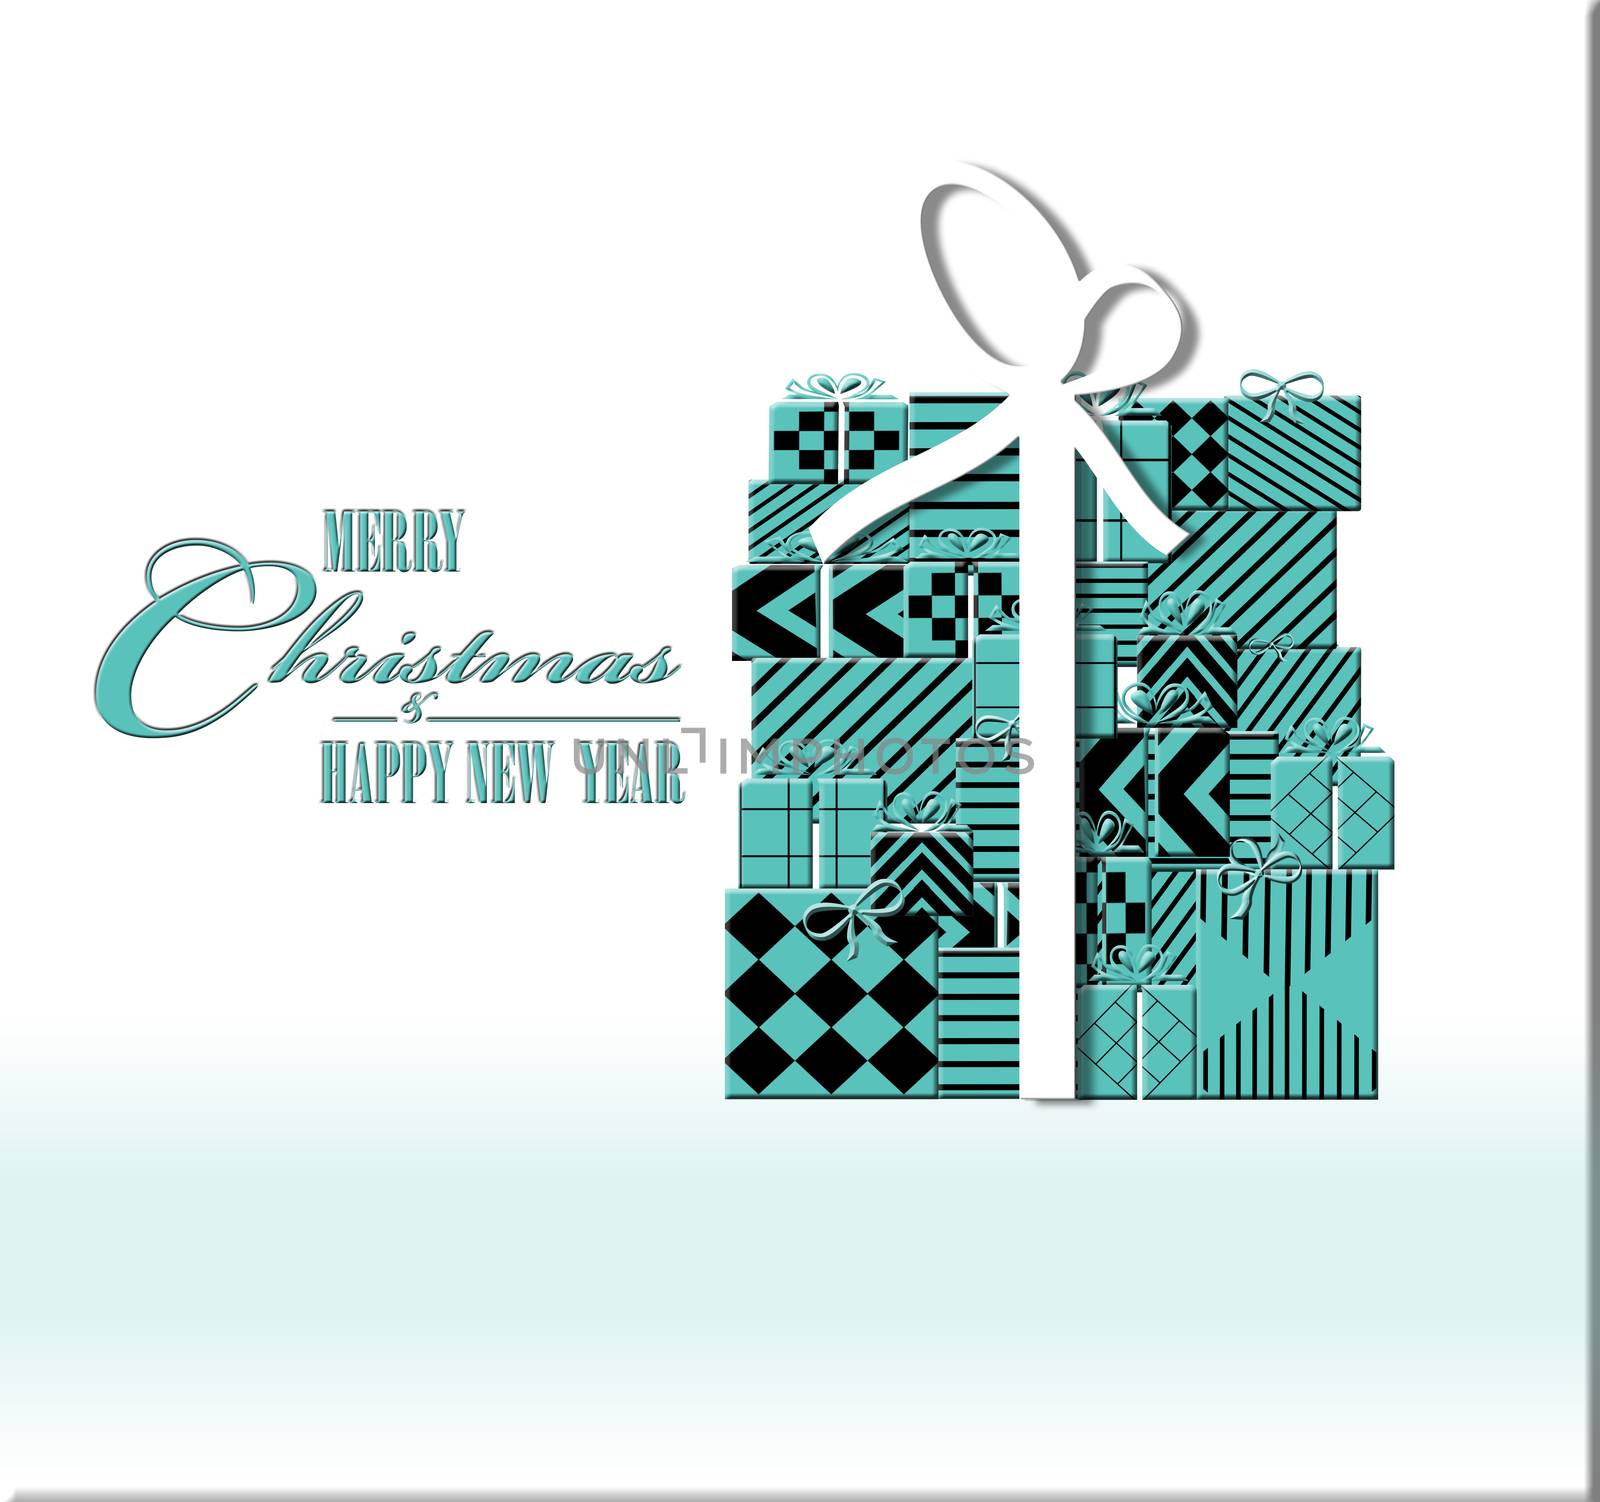 Art deco Merry Christmas card, Christmas present gift boxes and text in pastel trendy chic background in turquoise blue. 3D Illustration